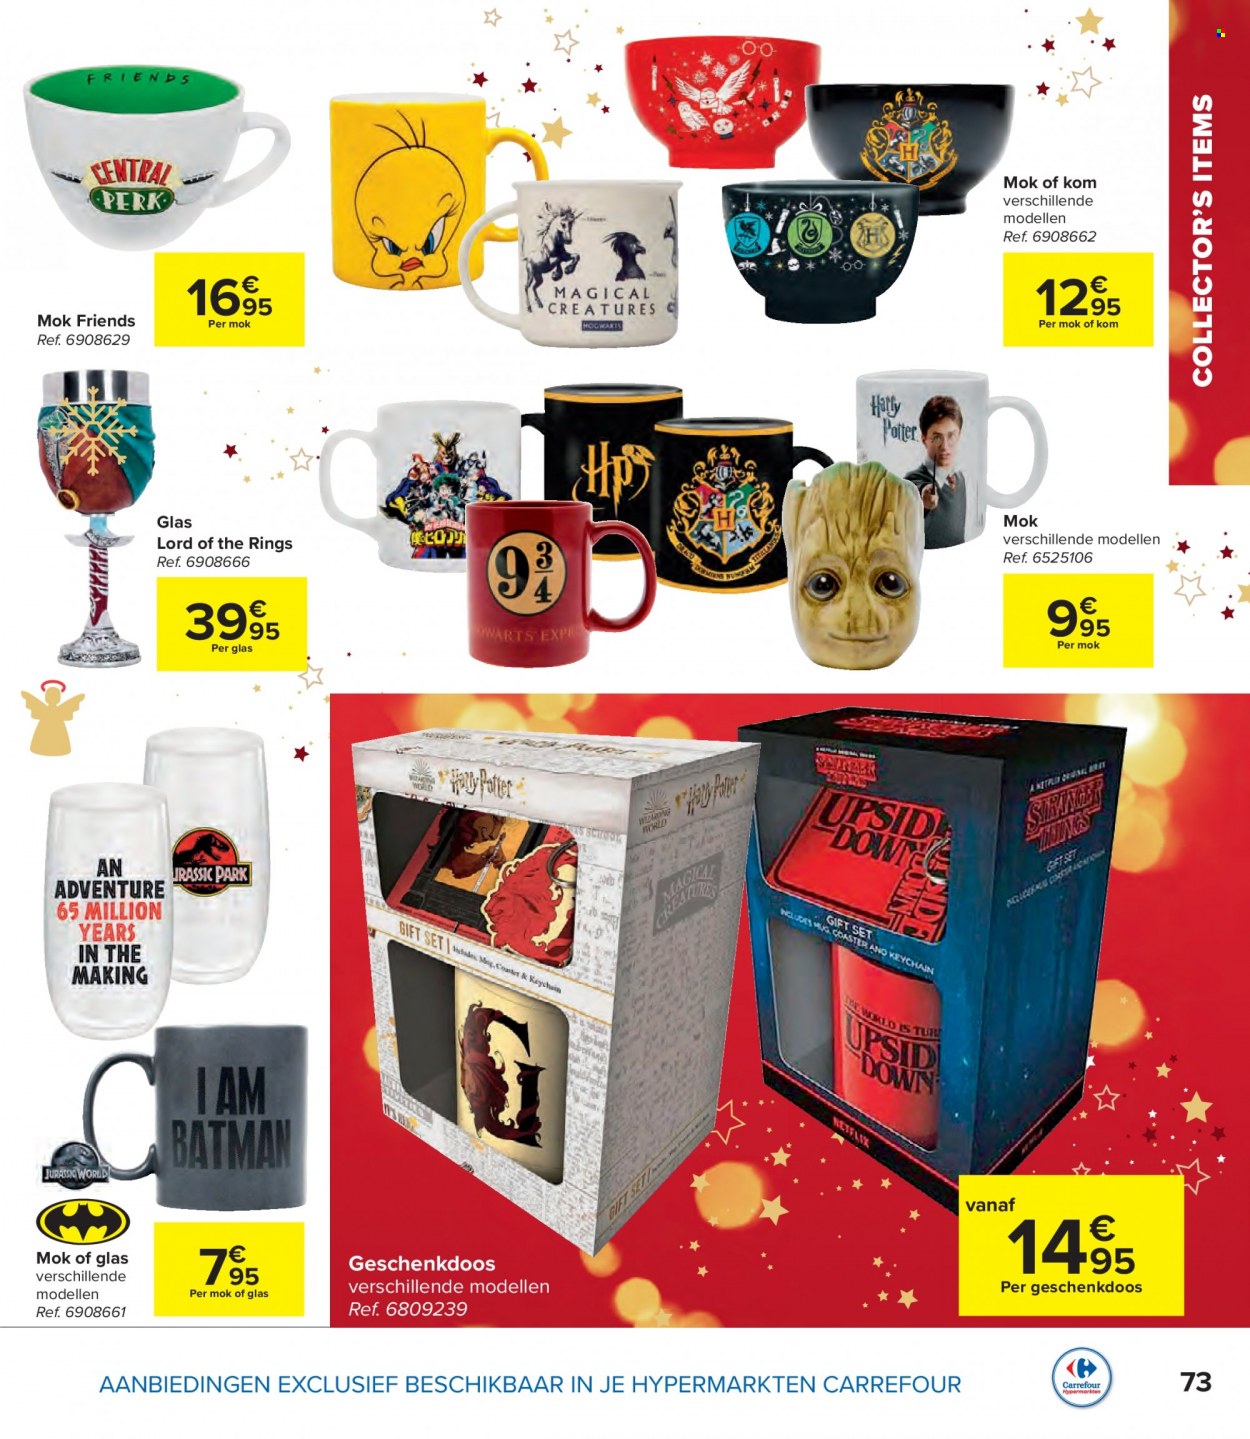 Catalogue Carrefour hypermarkt - 16.11.2022 - 31.12.2022. Page 73.